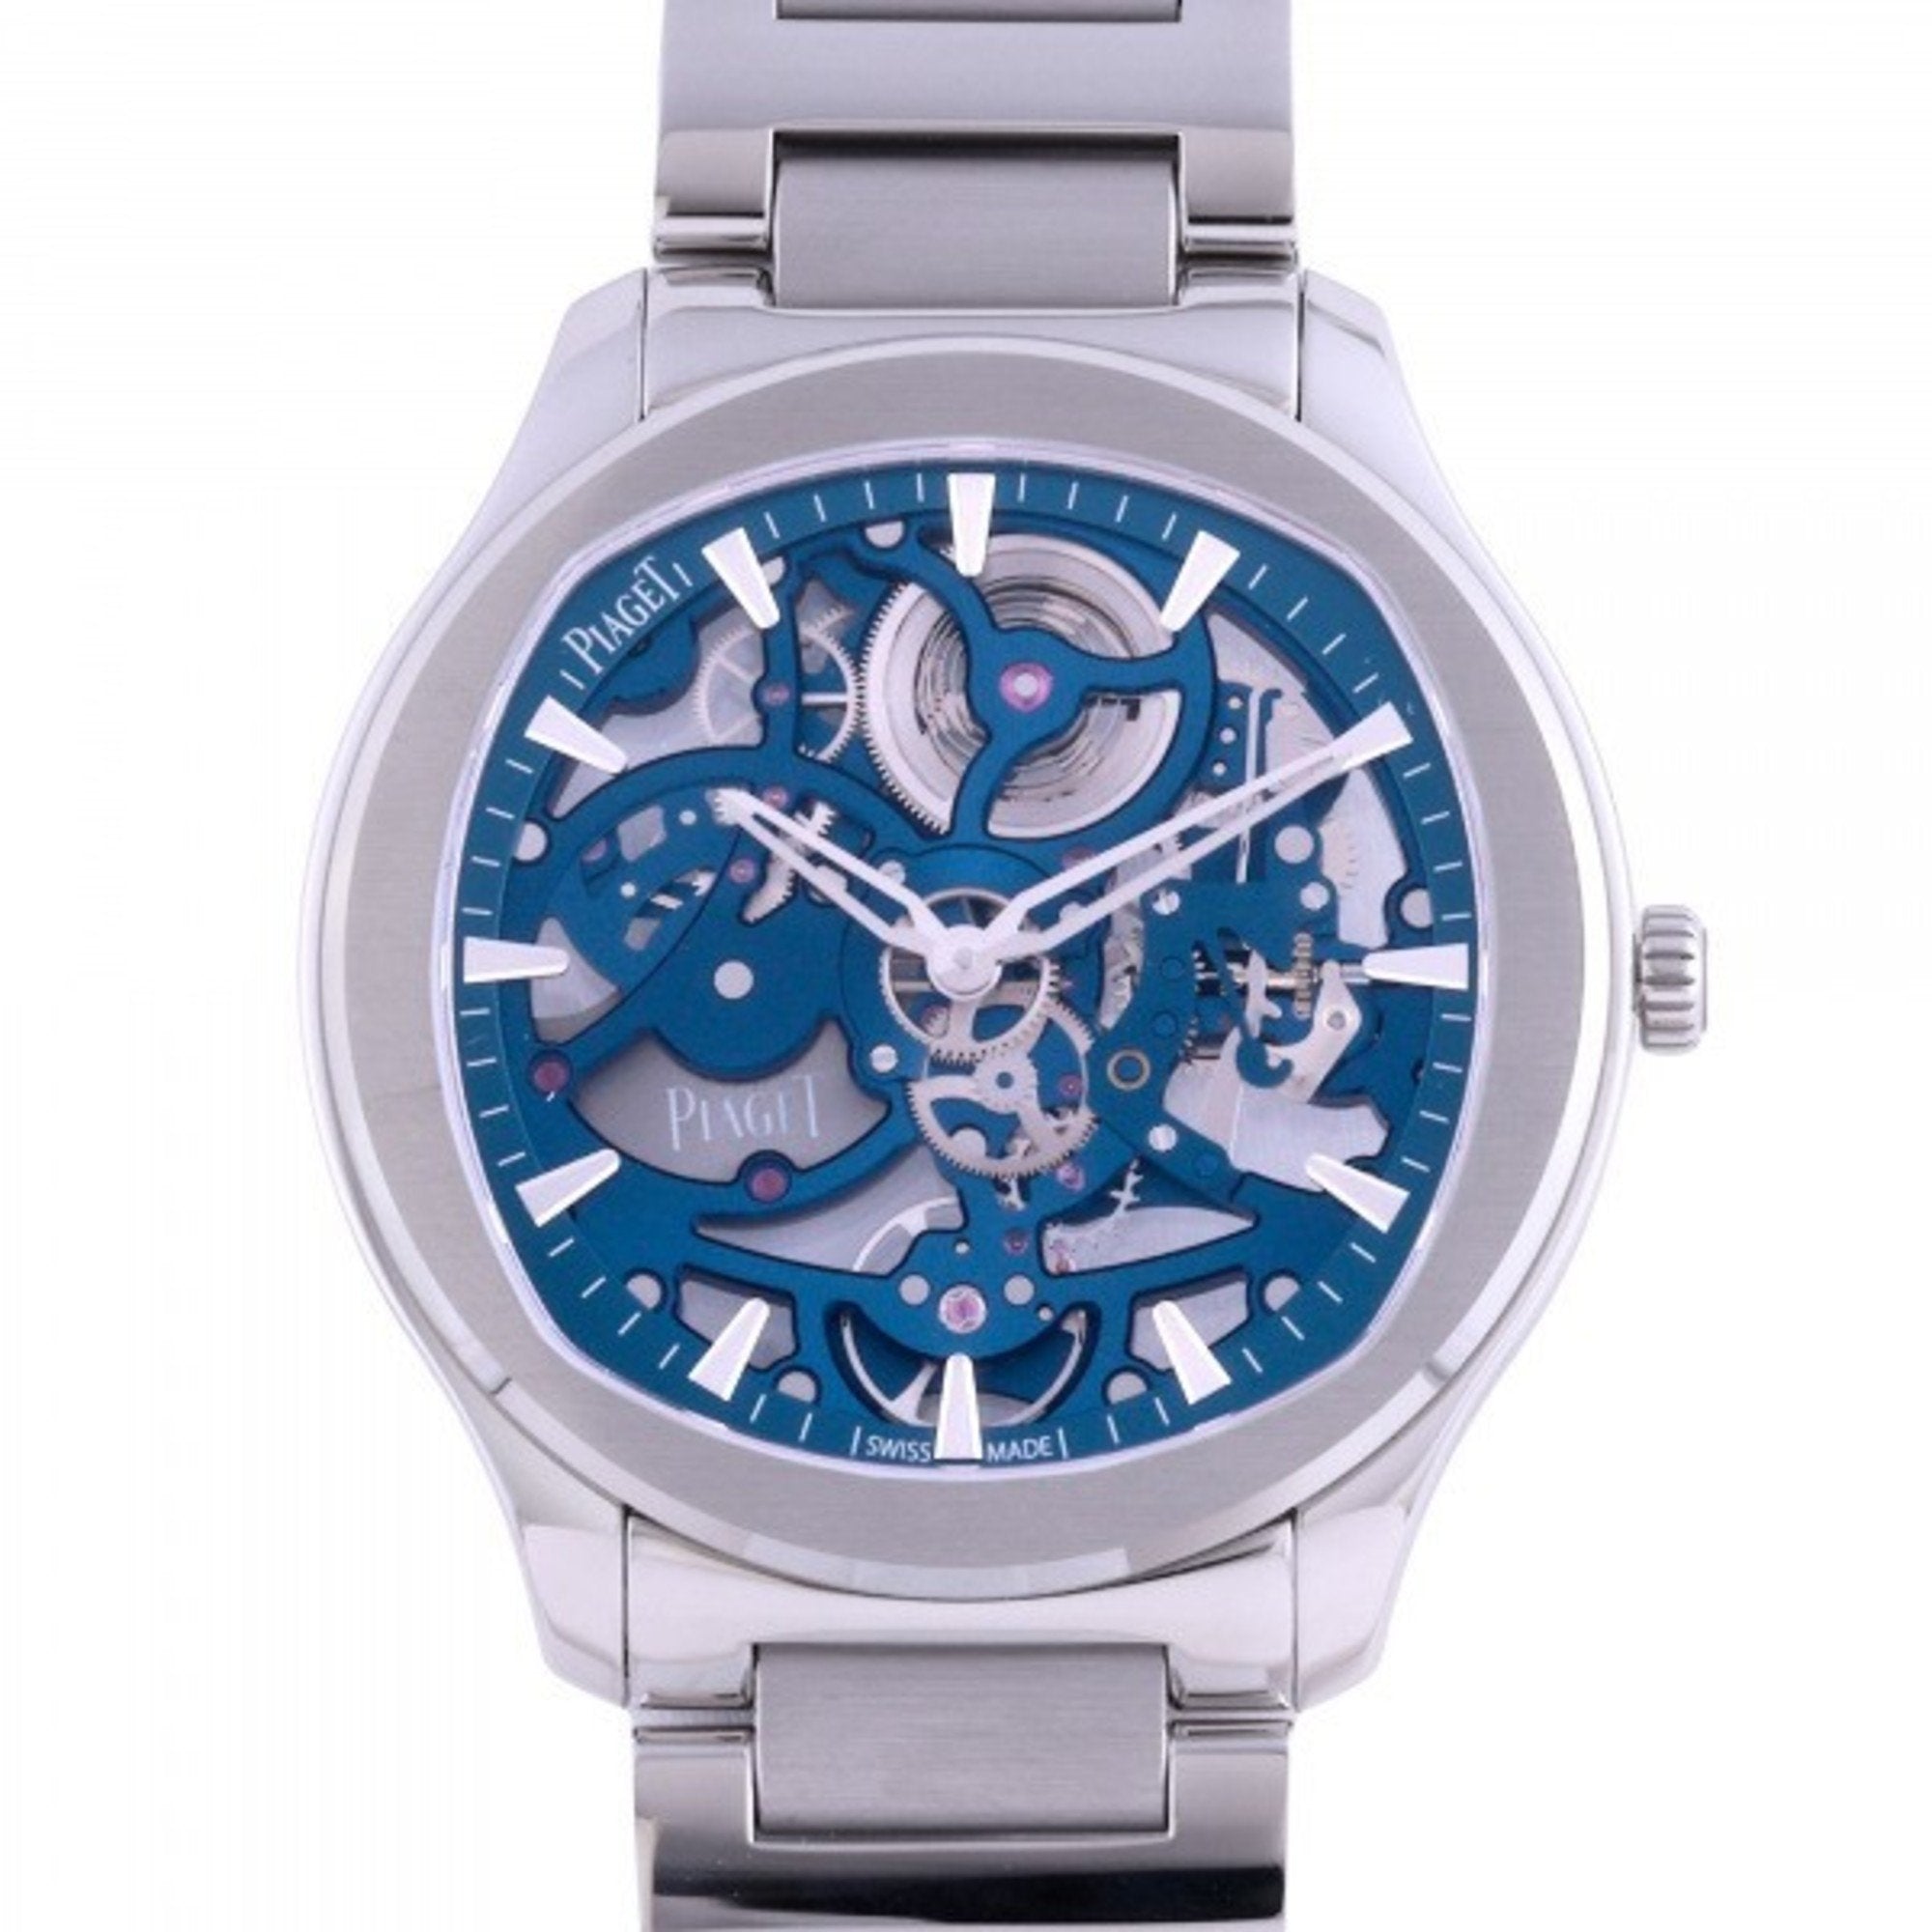 Image of PIAGET Polo G0A45004 silver/blue dial watch men's